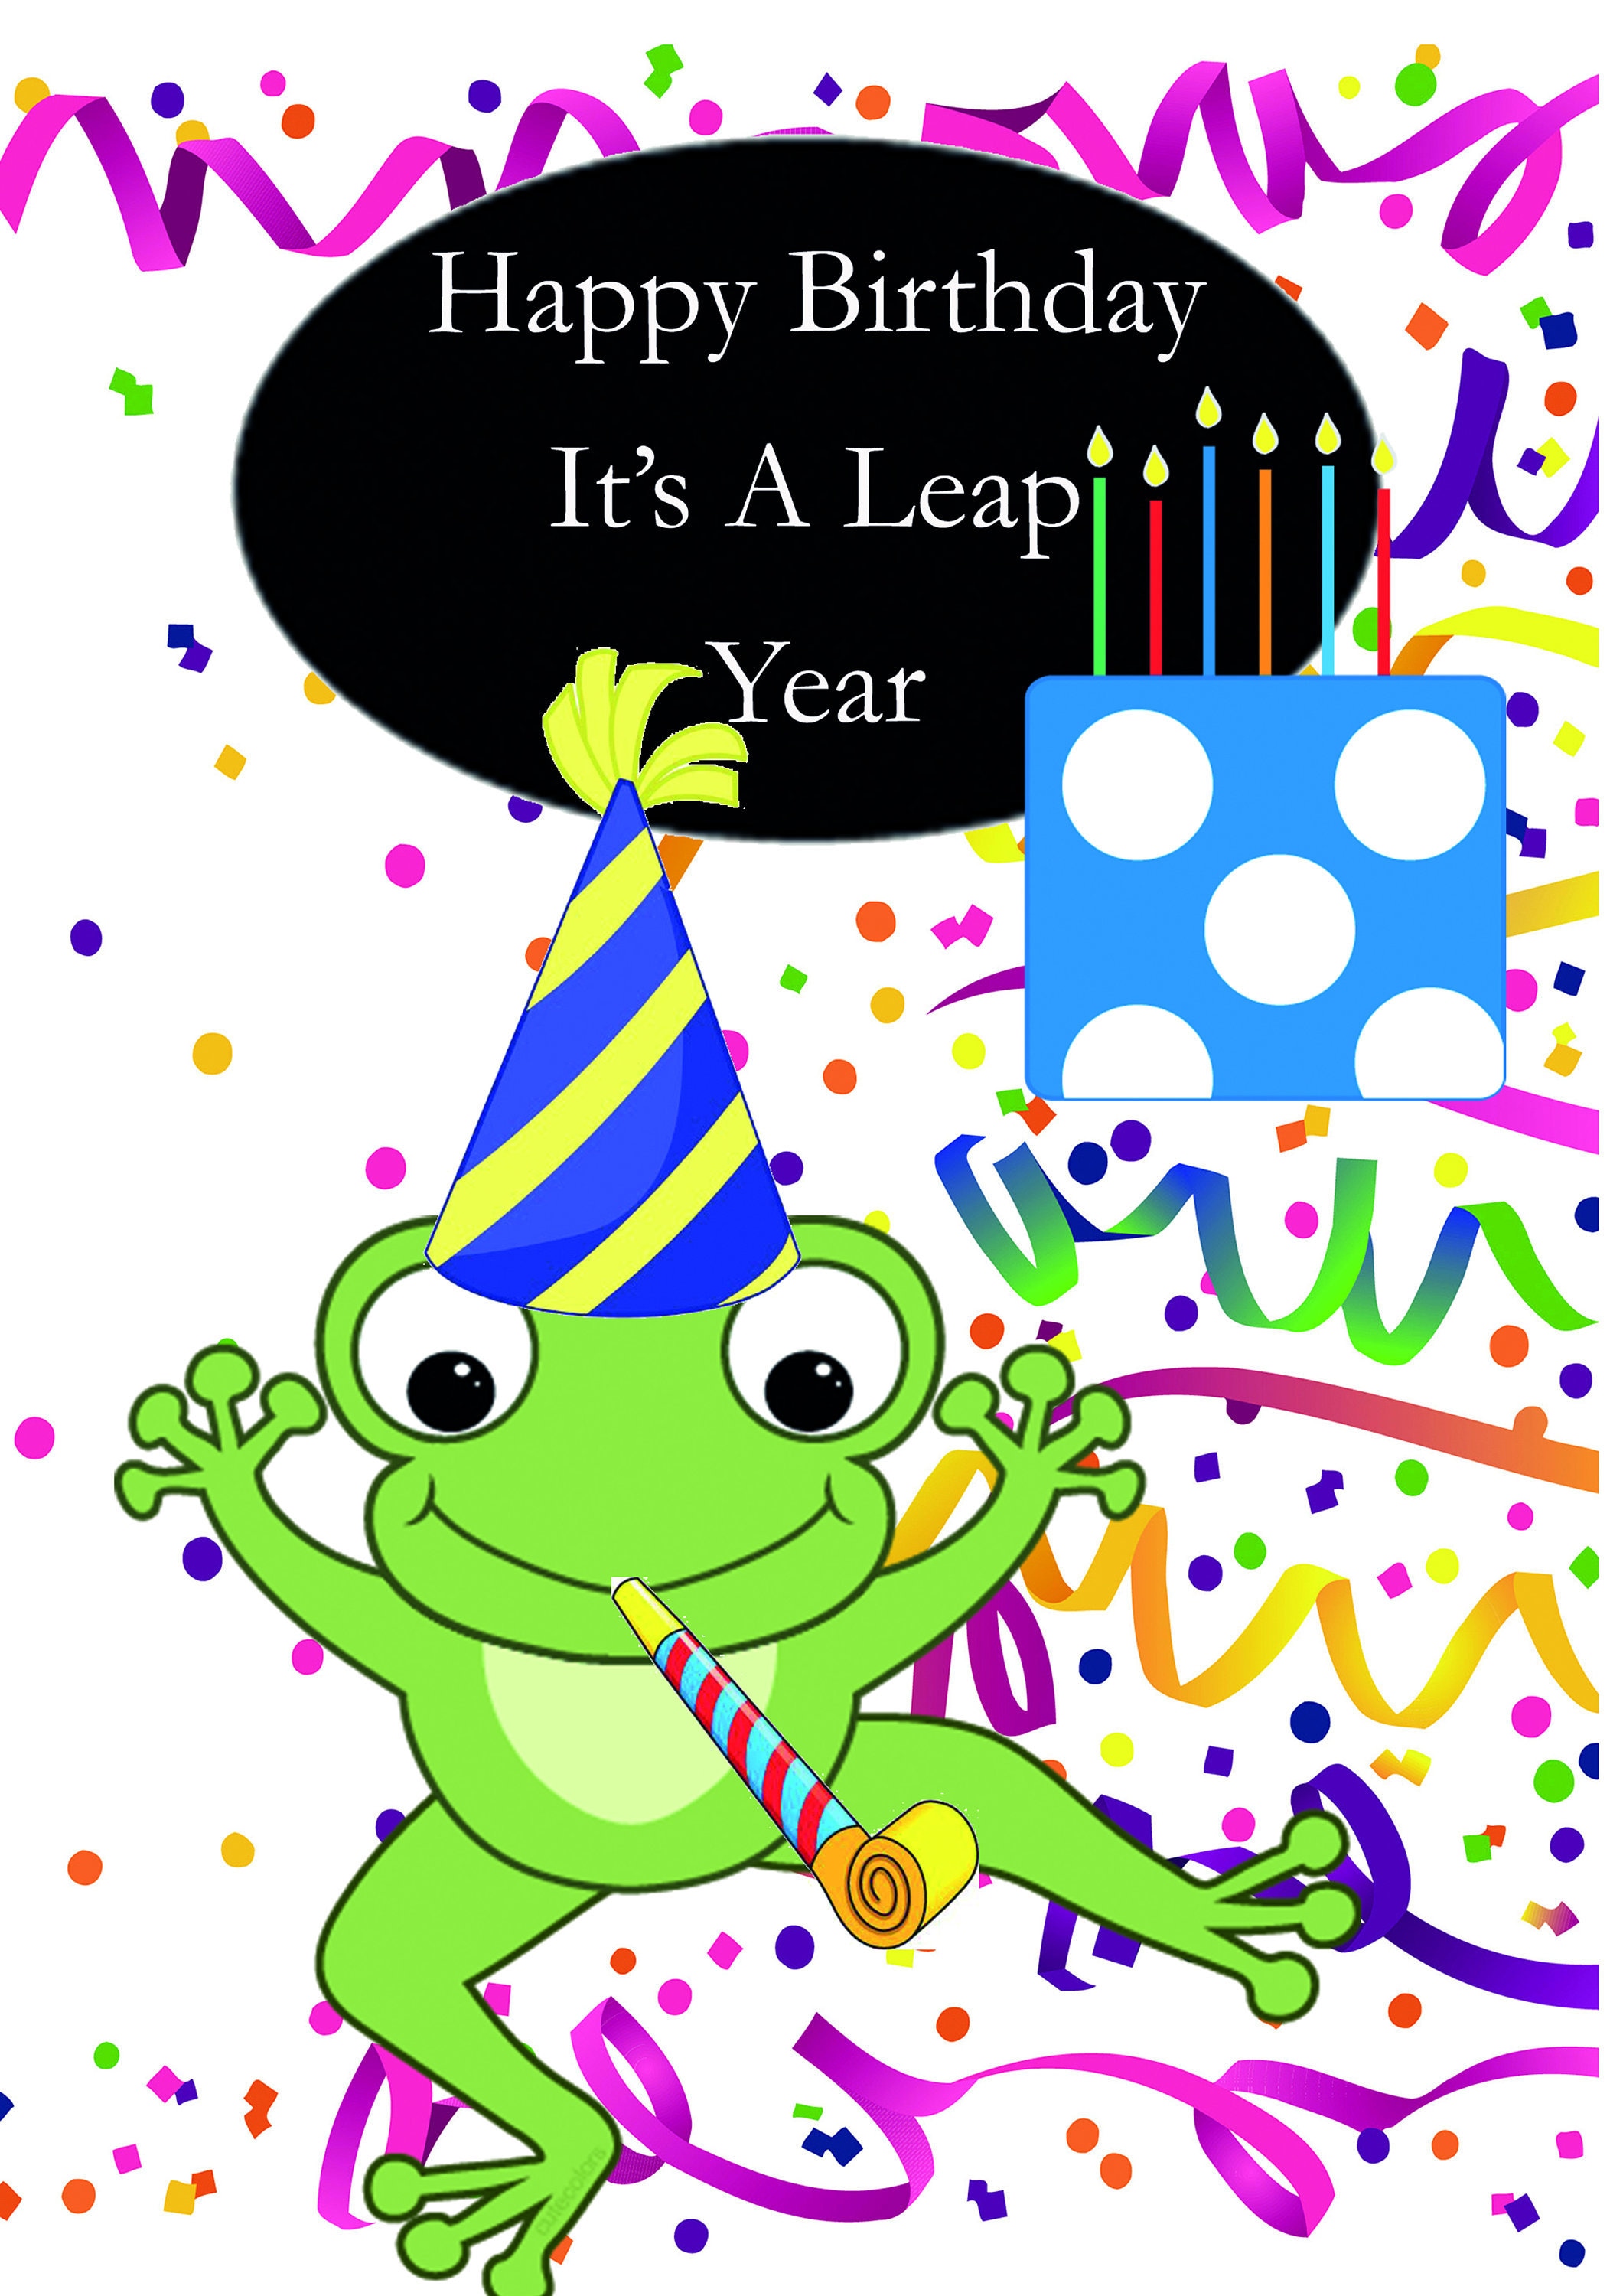 leap-year-birthday-cards-leap-year-etsy-leap-year-february-29th